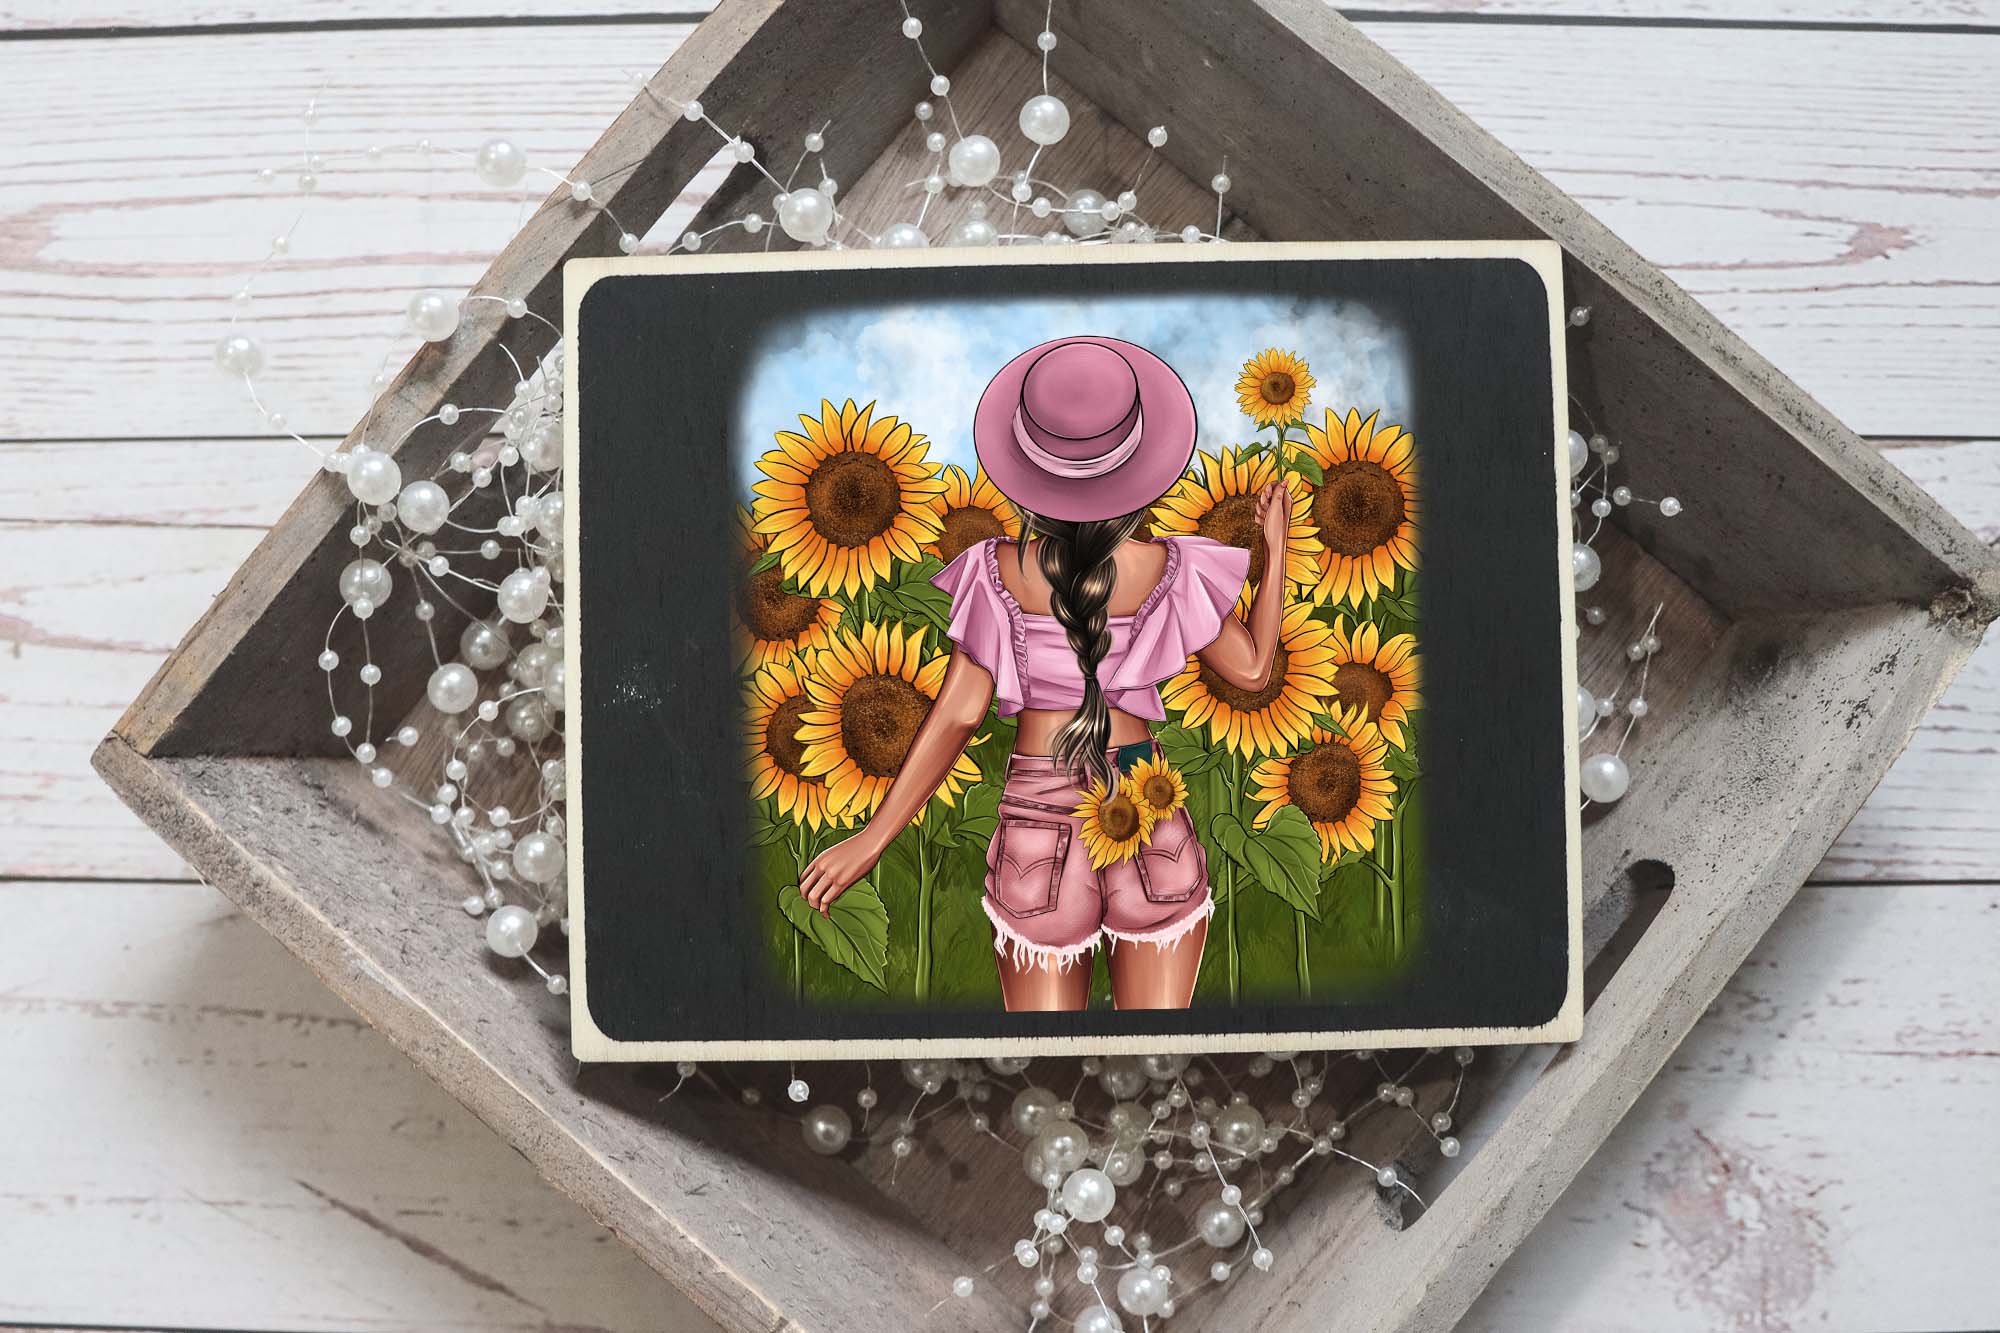 Fashionable Girl Sunflowers Clipart Poster Print Example.